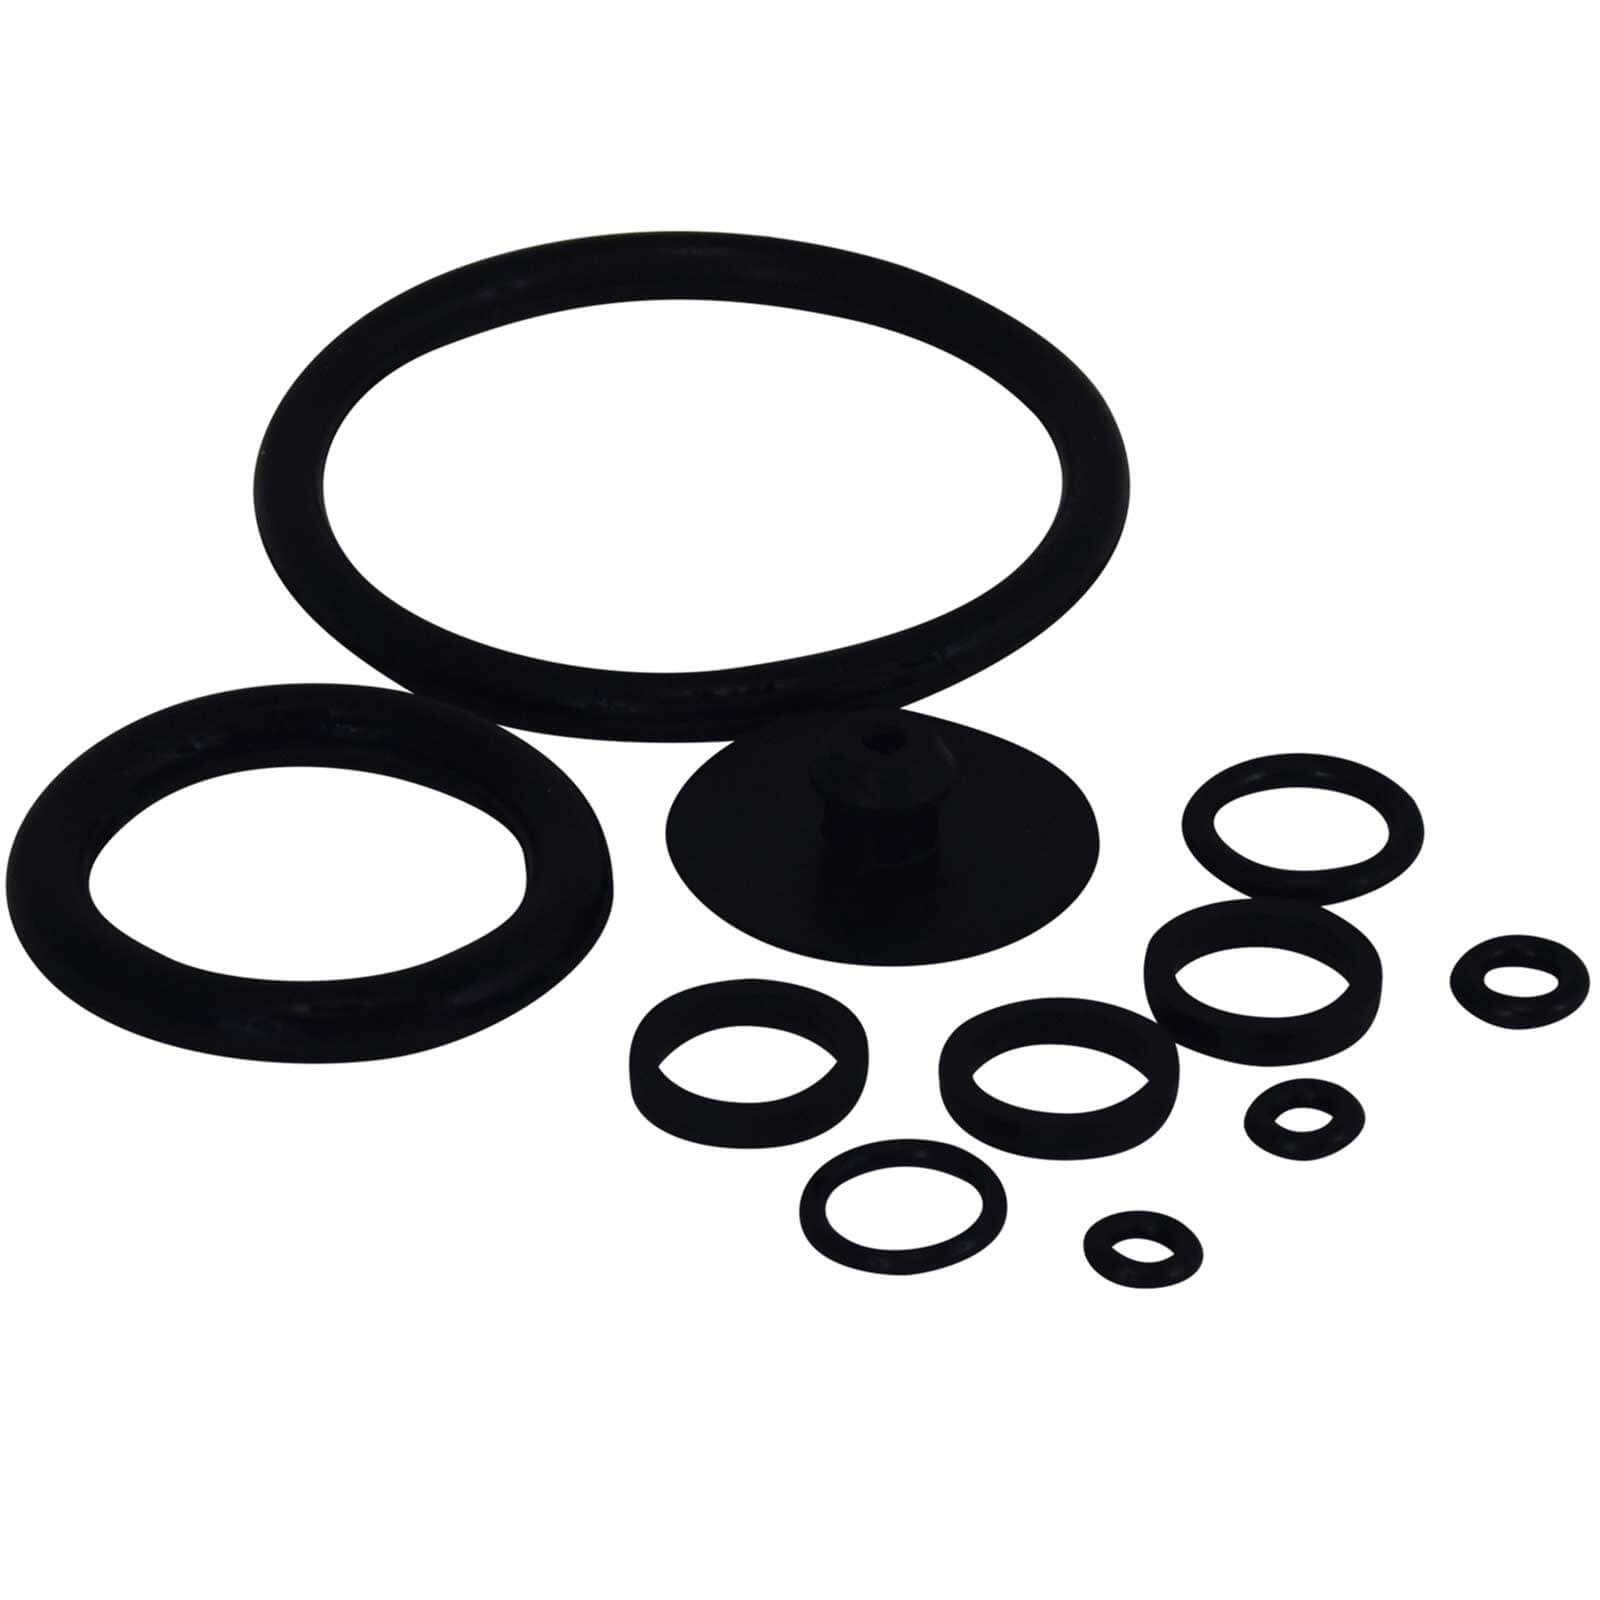 Photo of Spear And Jackson Replacement O Rings For 5l And 8l Pressure Sprayers